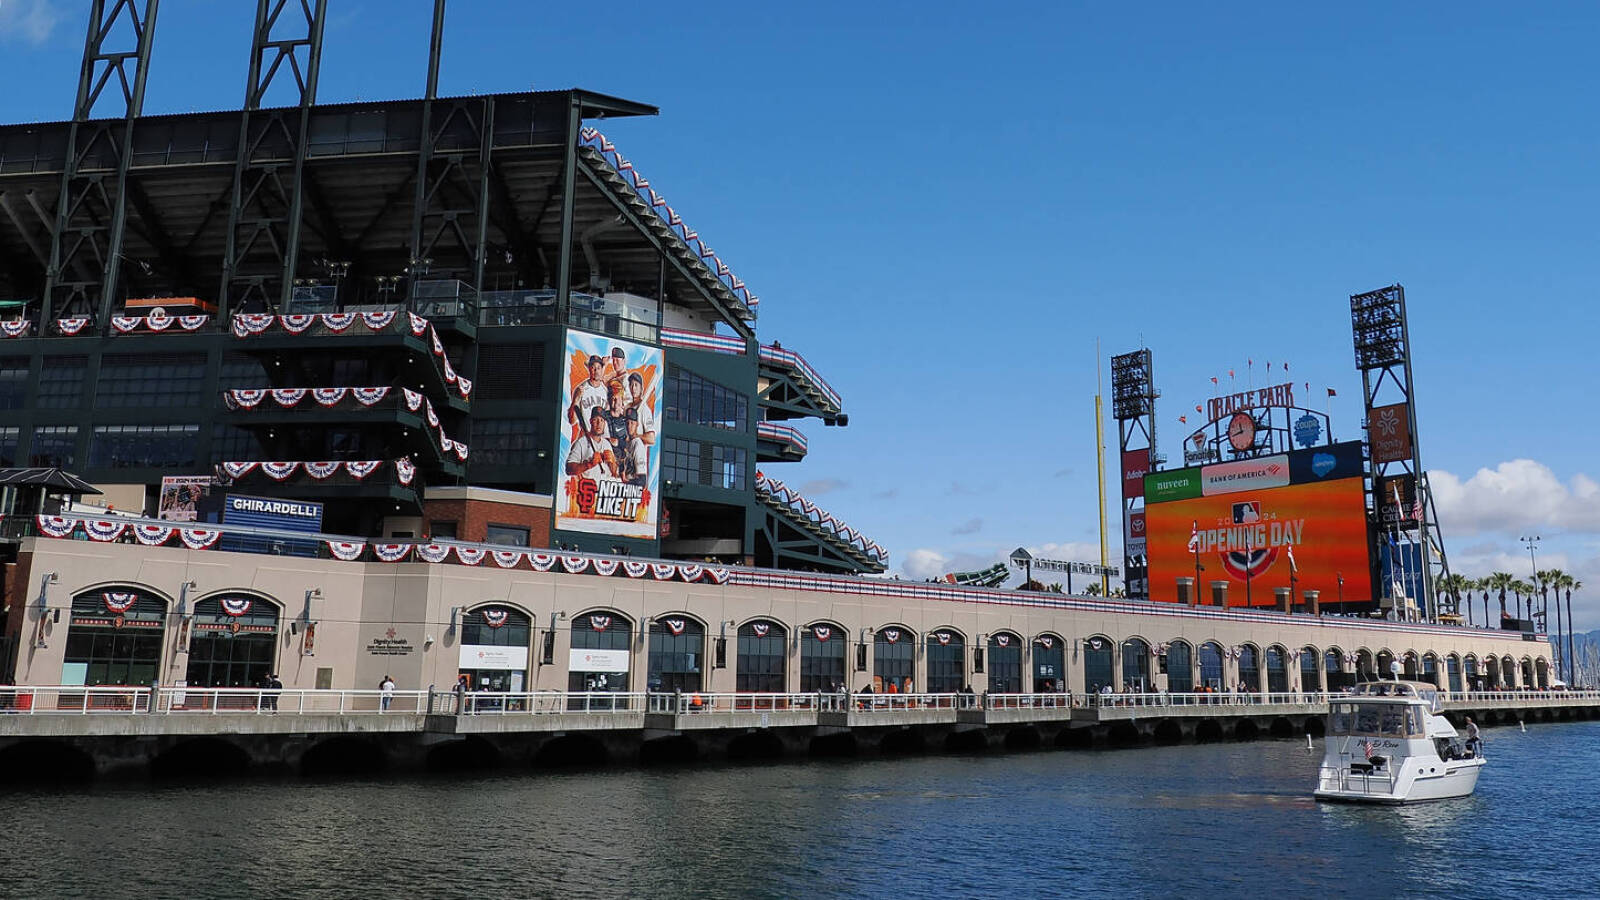 Watch: 49ers punter boots football into McCovey Cove to begin Giants home opener